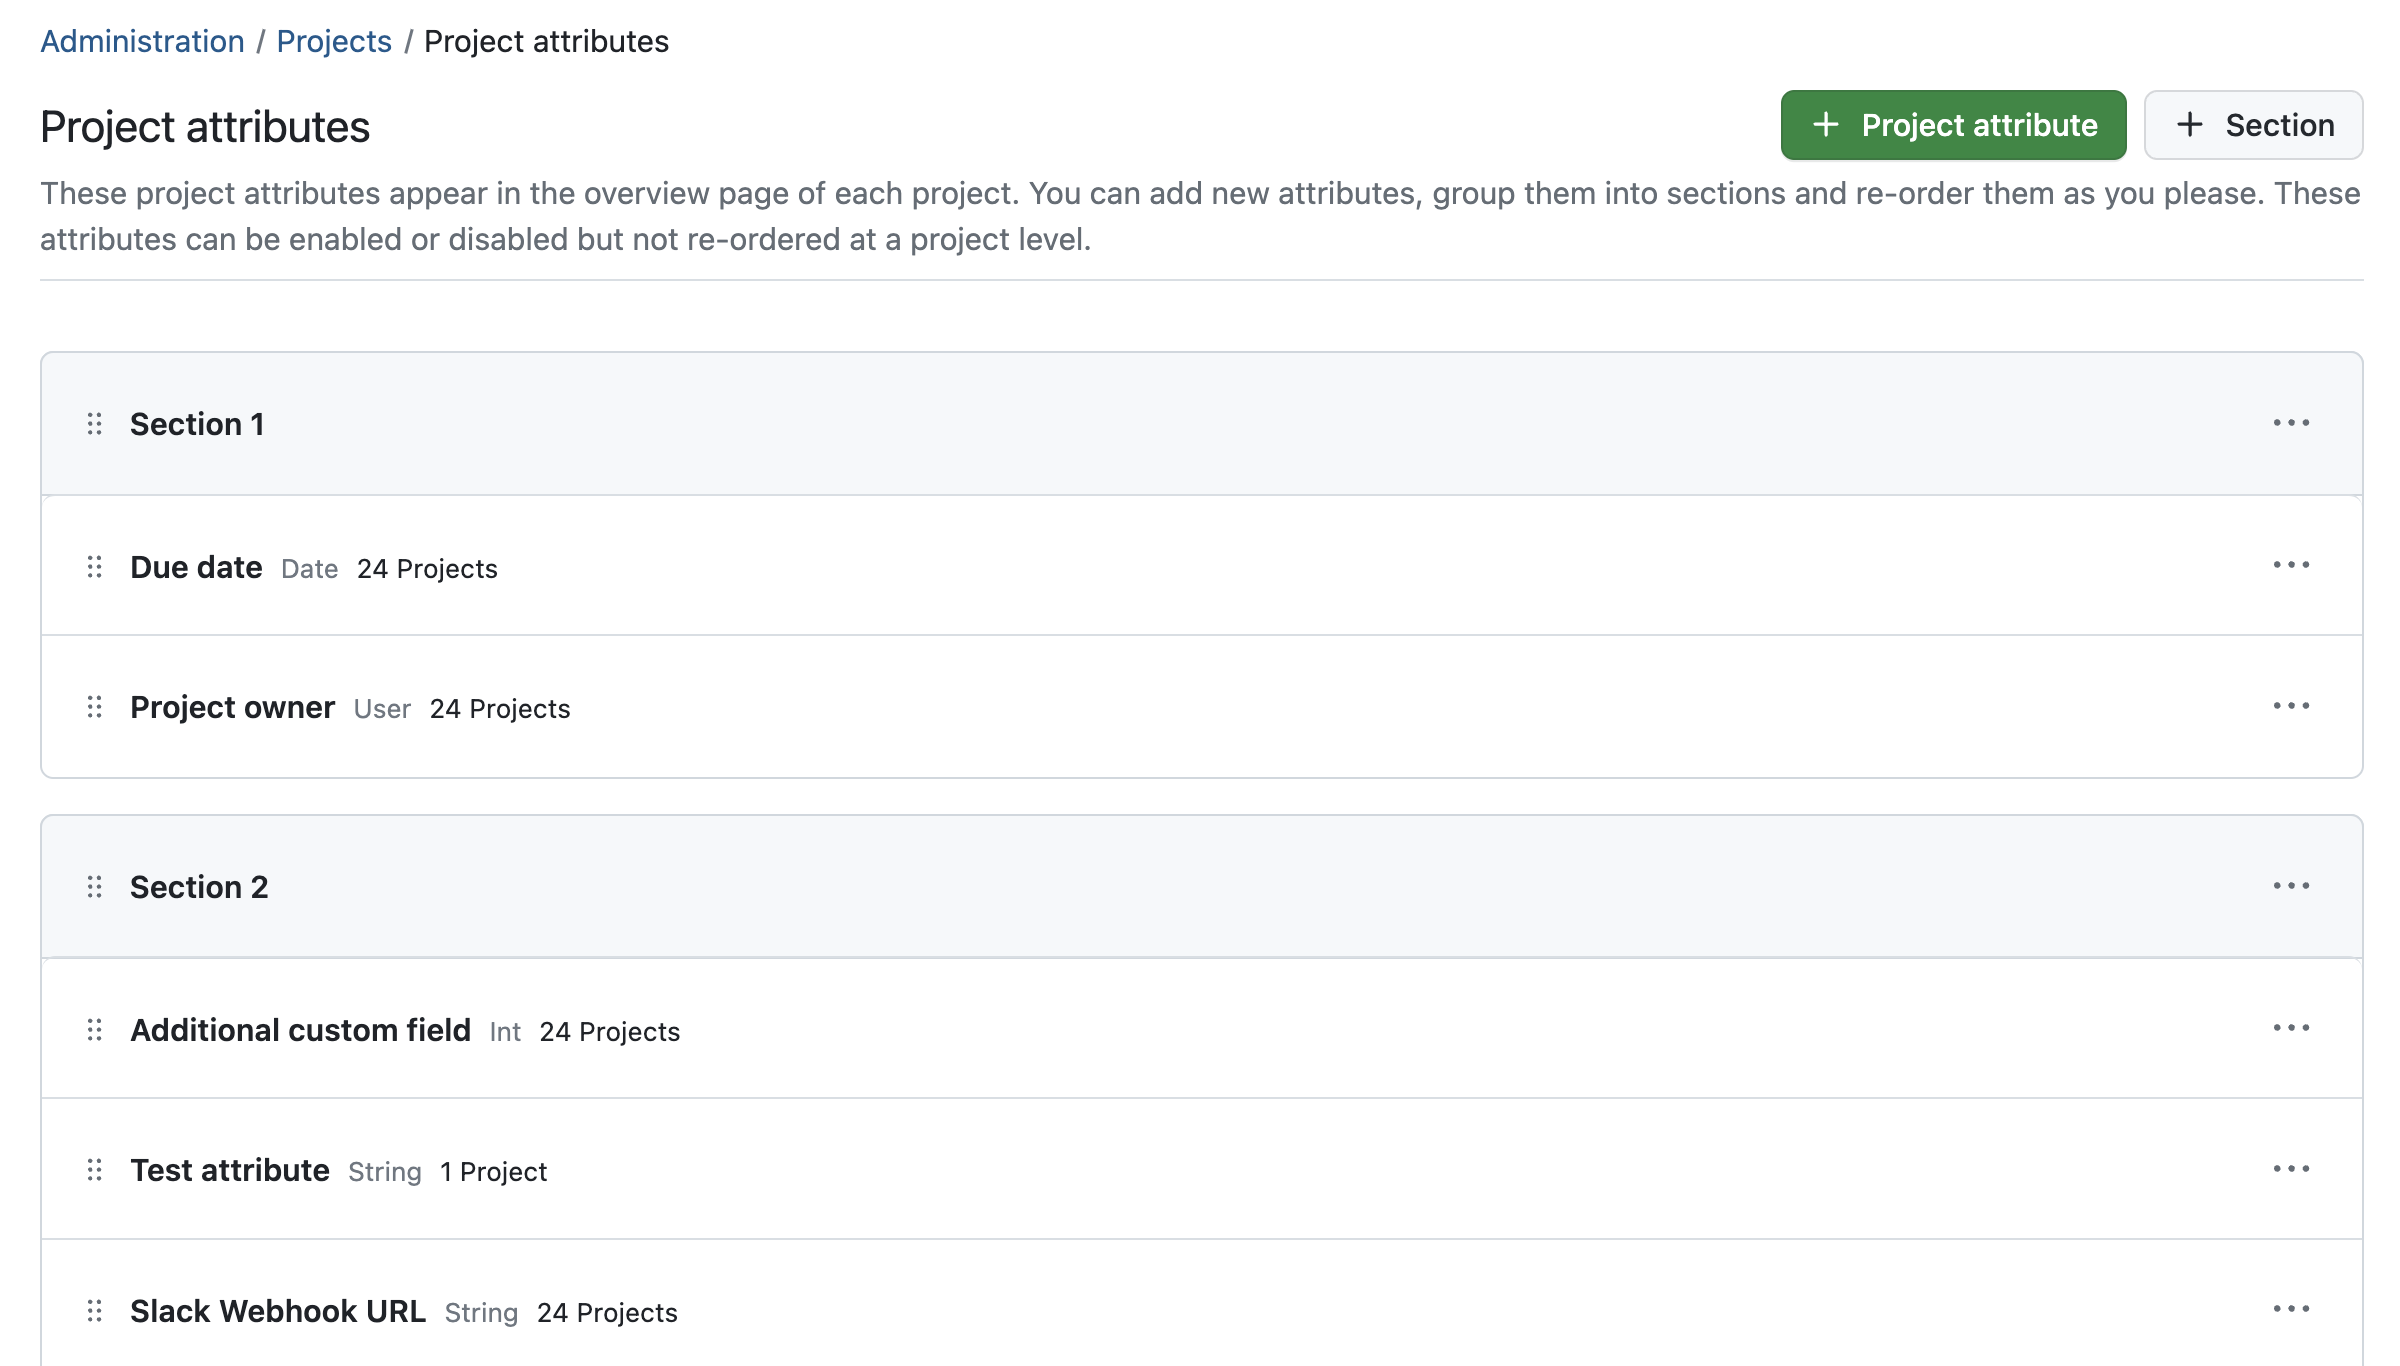 Manage project attributes and sections in administration